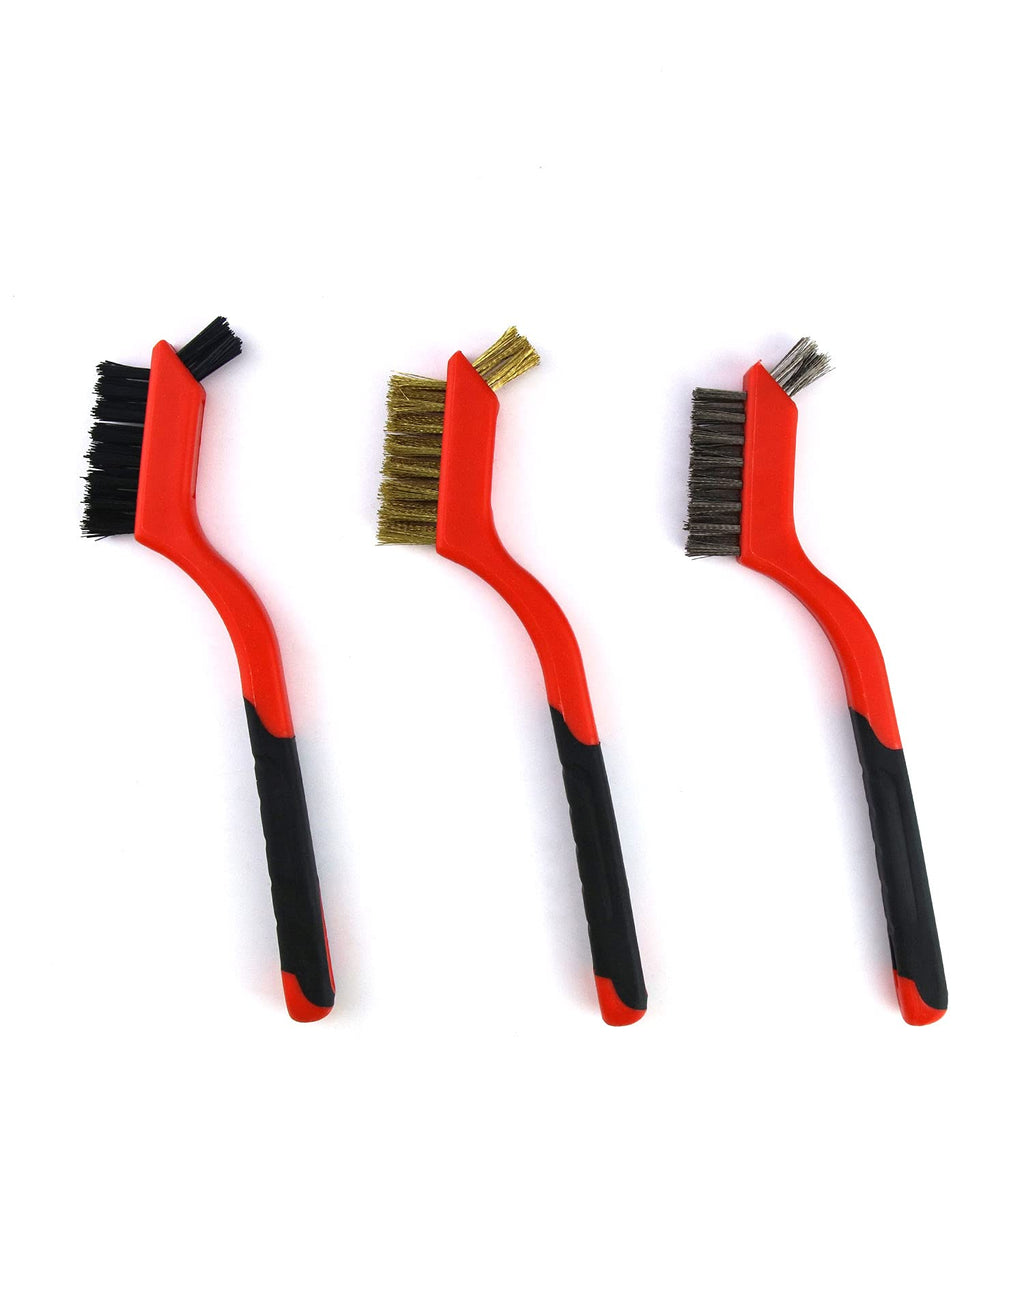  [AUSTRALIA] - QWORK Wire Brush Set, Nylon / Brass / Stainless Steel Bristles for Scrubbing Rust, Dirt and Paint, 1 Set Including 3 Pieces